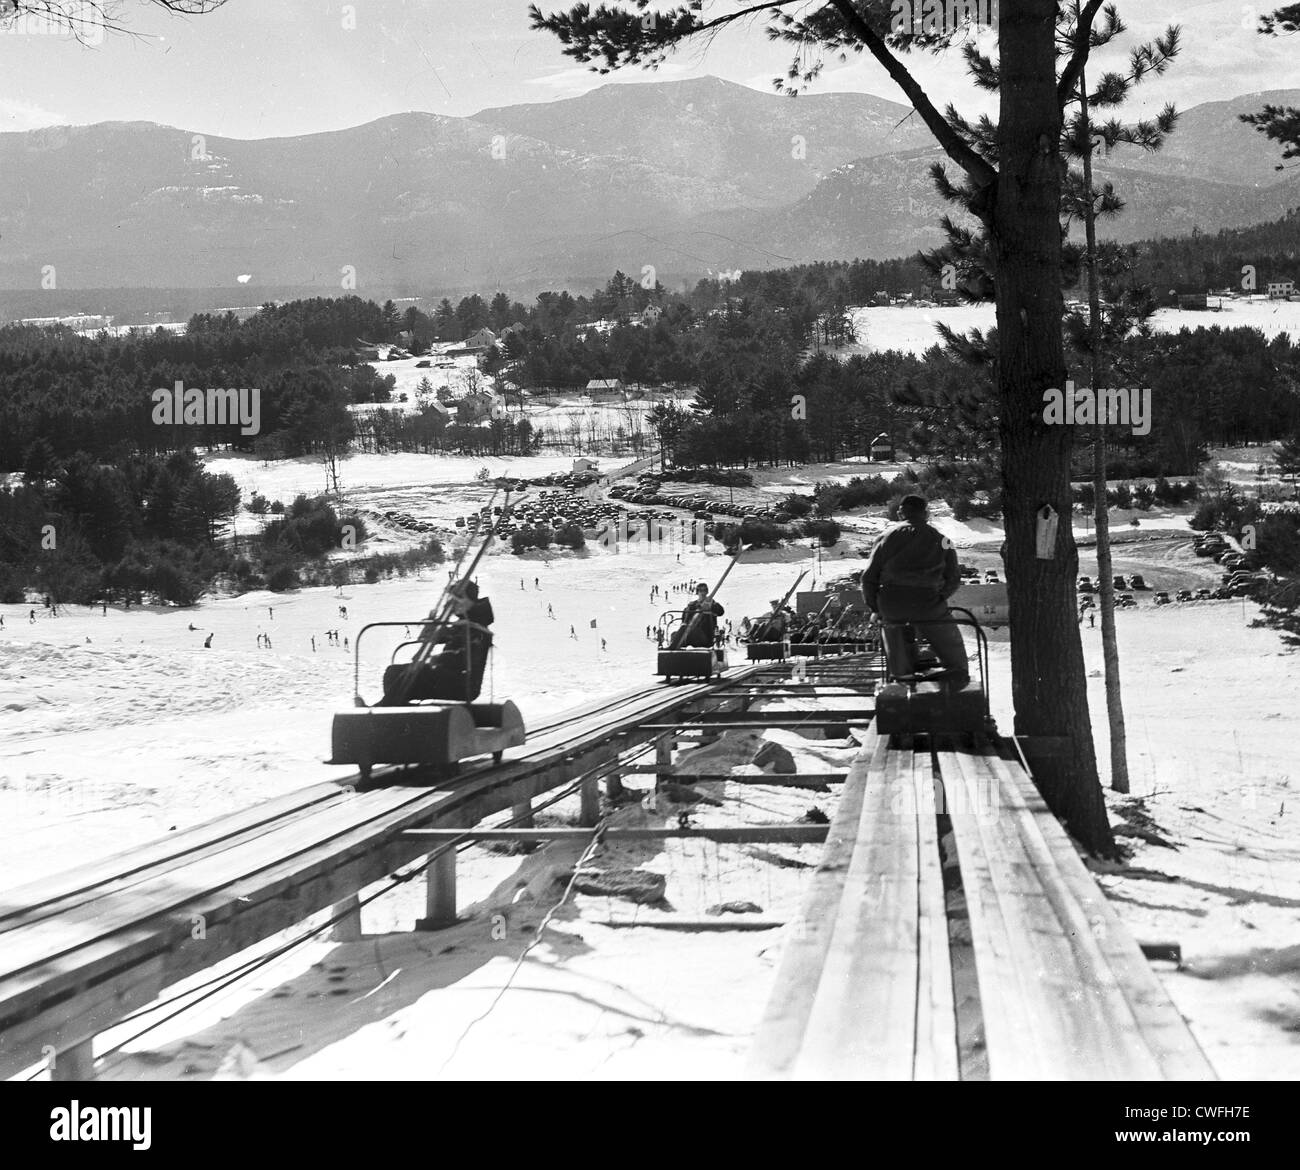 View of the Skimobile at Cranmore Mountain ski resort, North Conway, New Hampshireon March 23, 1941 Stock Photo